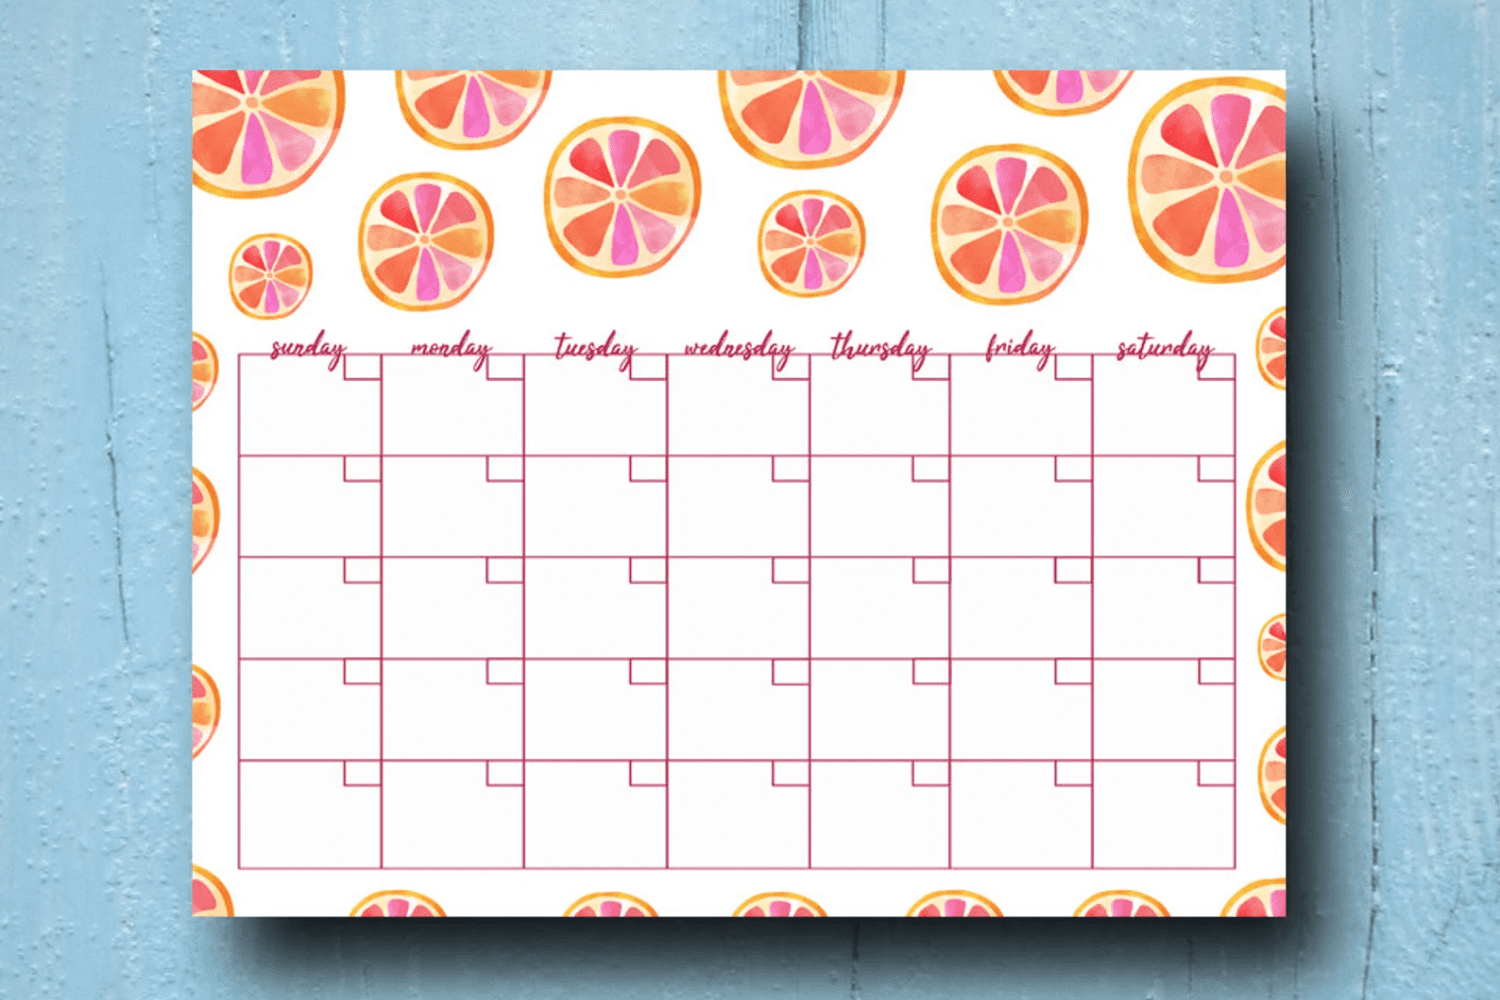 Calendar with drawn colorful grapefruits.